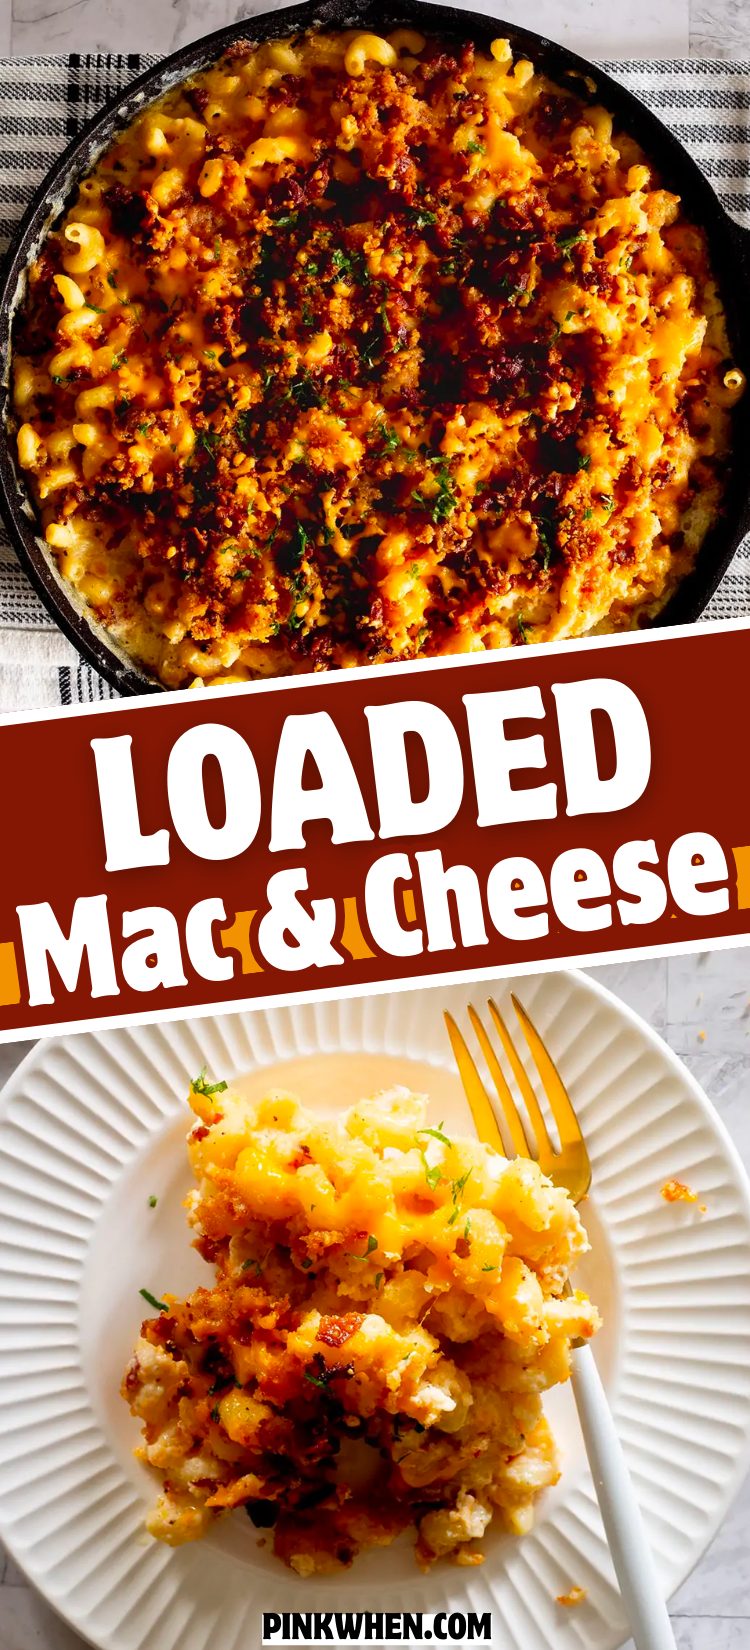 Loaded Mac and Cheese Recipe